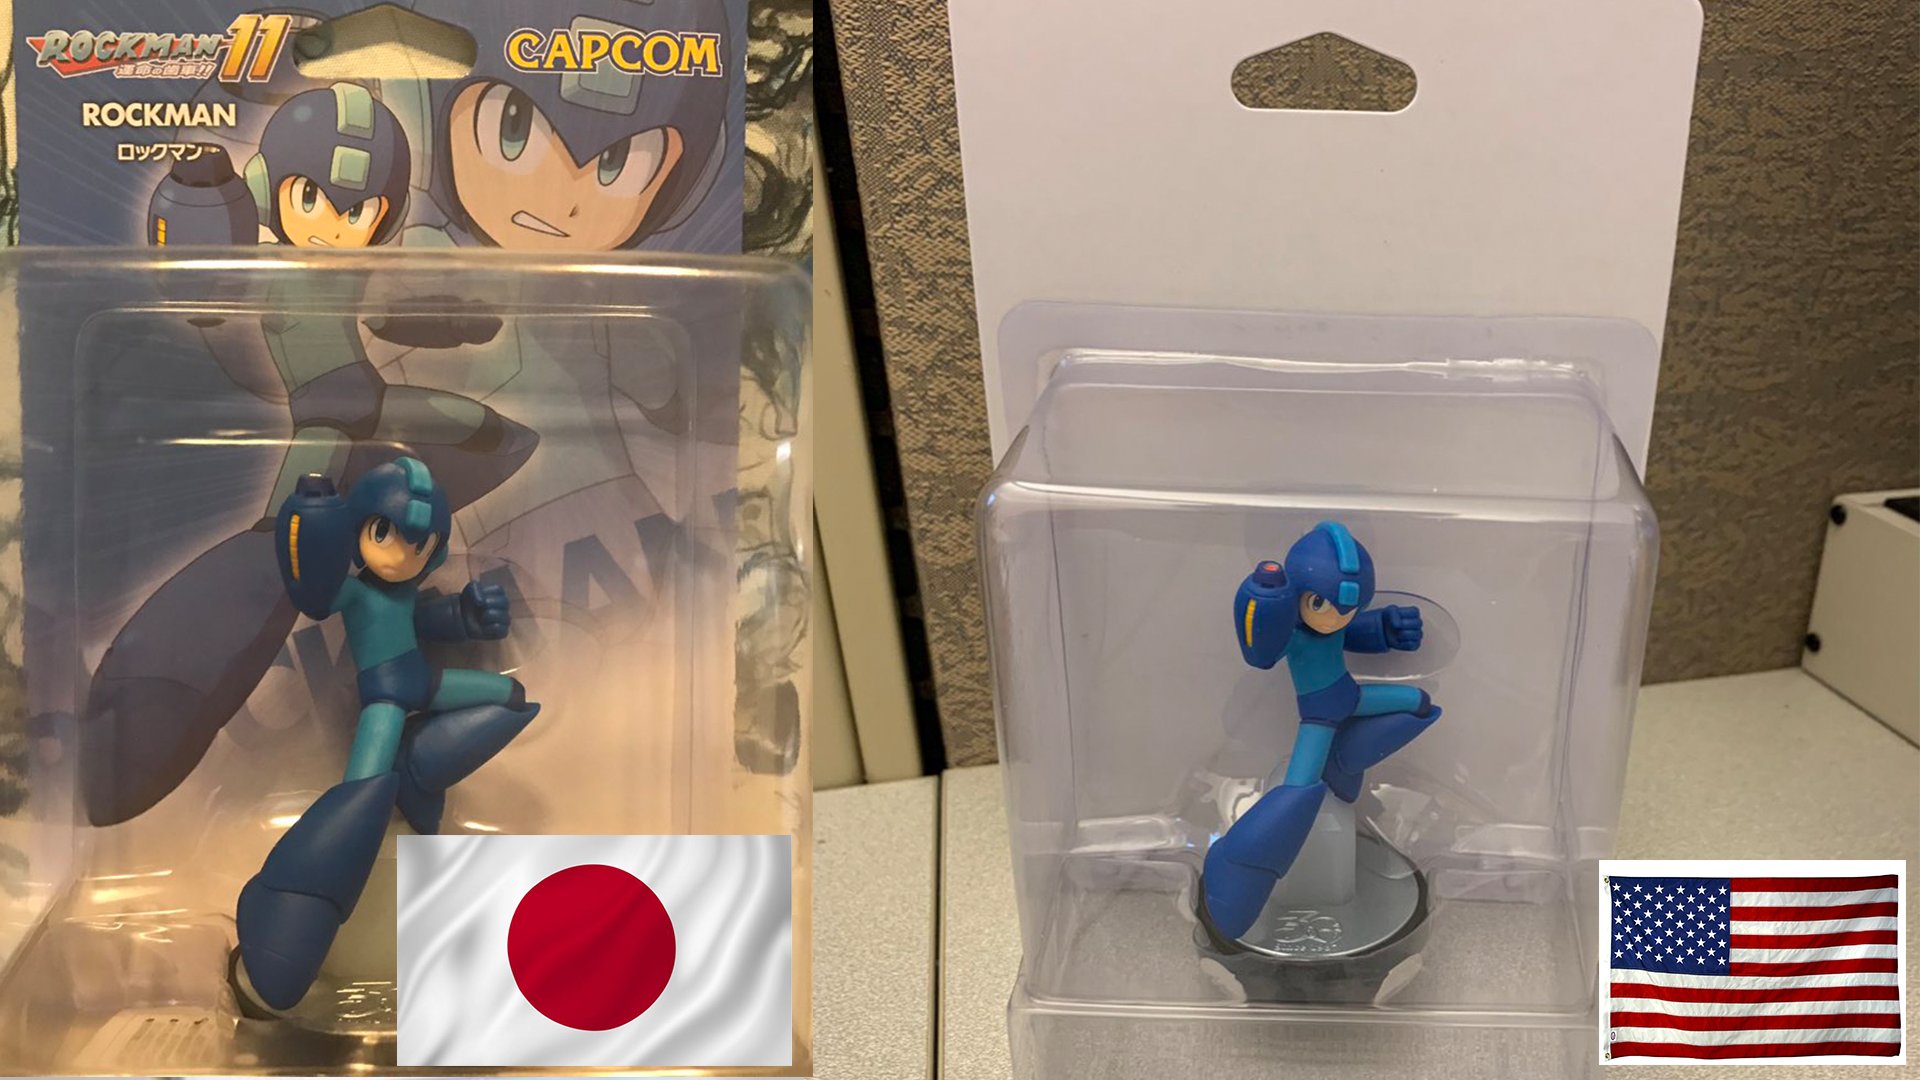 on Twitter: "If you're looking to import the Mega Man 11 amiibo from Japan, in mind it DOES have box art compared to the plain white we got